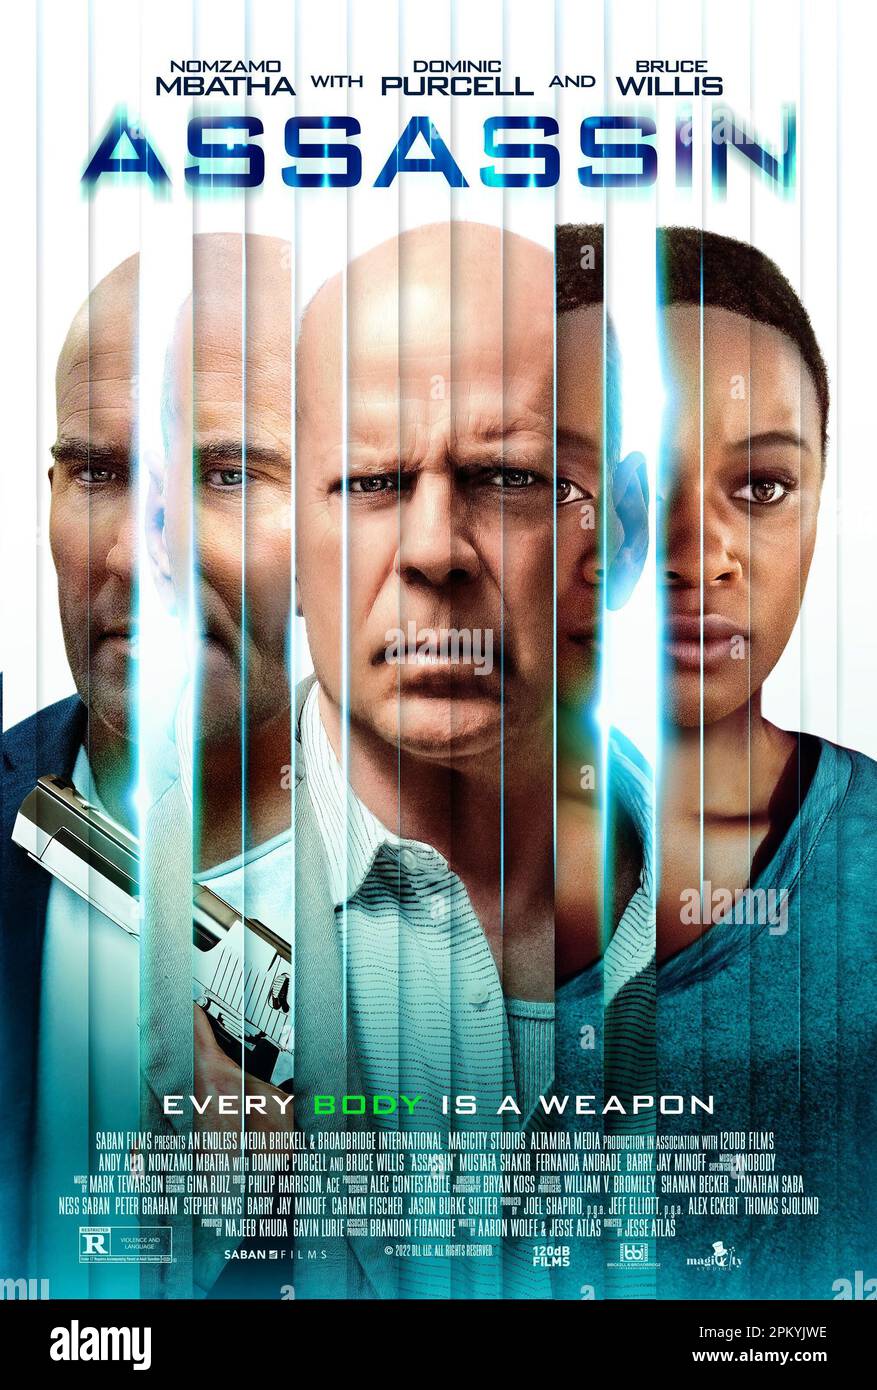 Assassin poster  Dominic Purcell, Bruce Willis & Nomzamo Mbatha Stock Photo